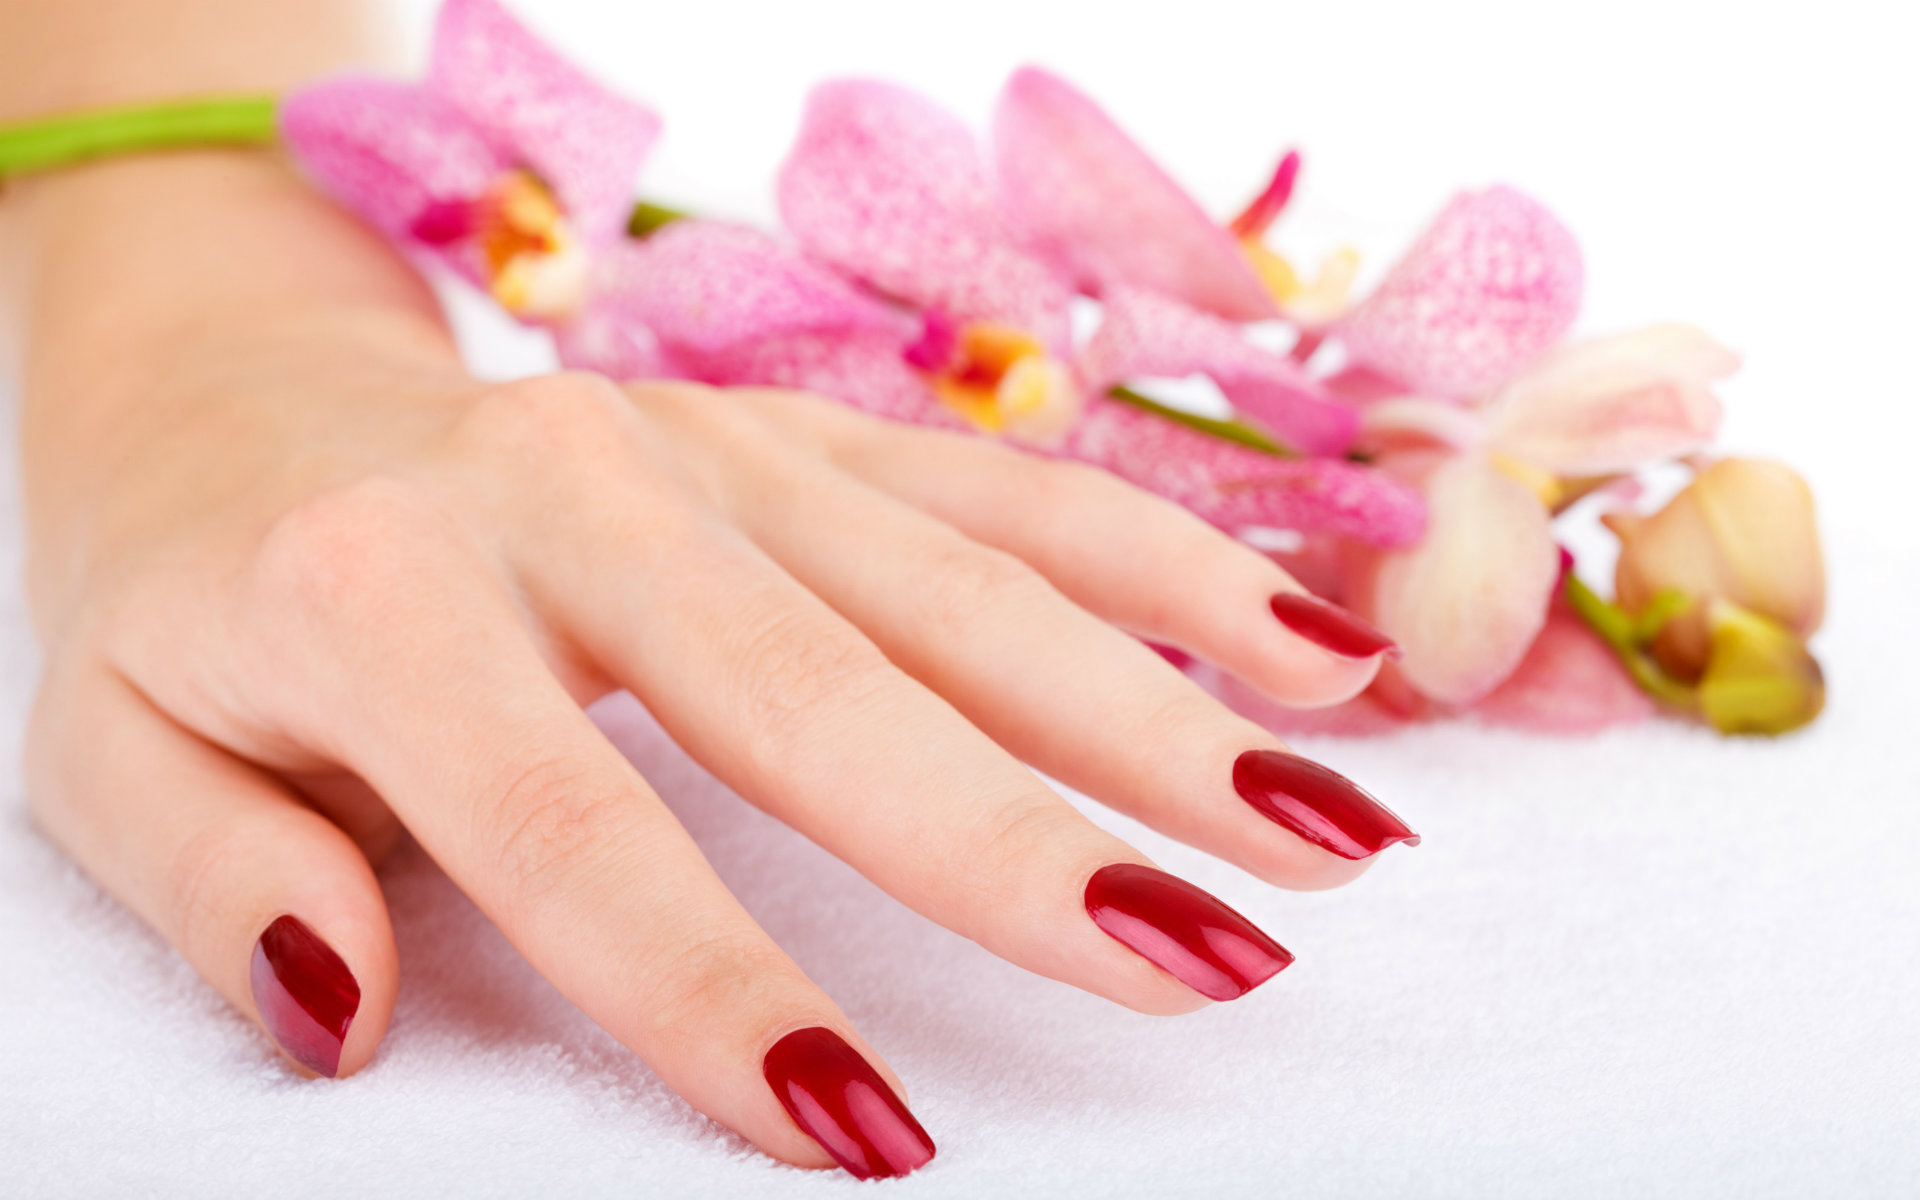 Get your nails done this wedding season at home